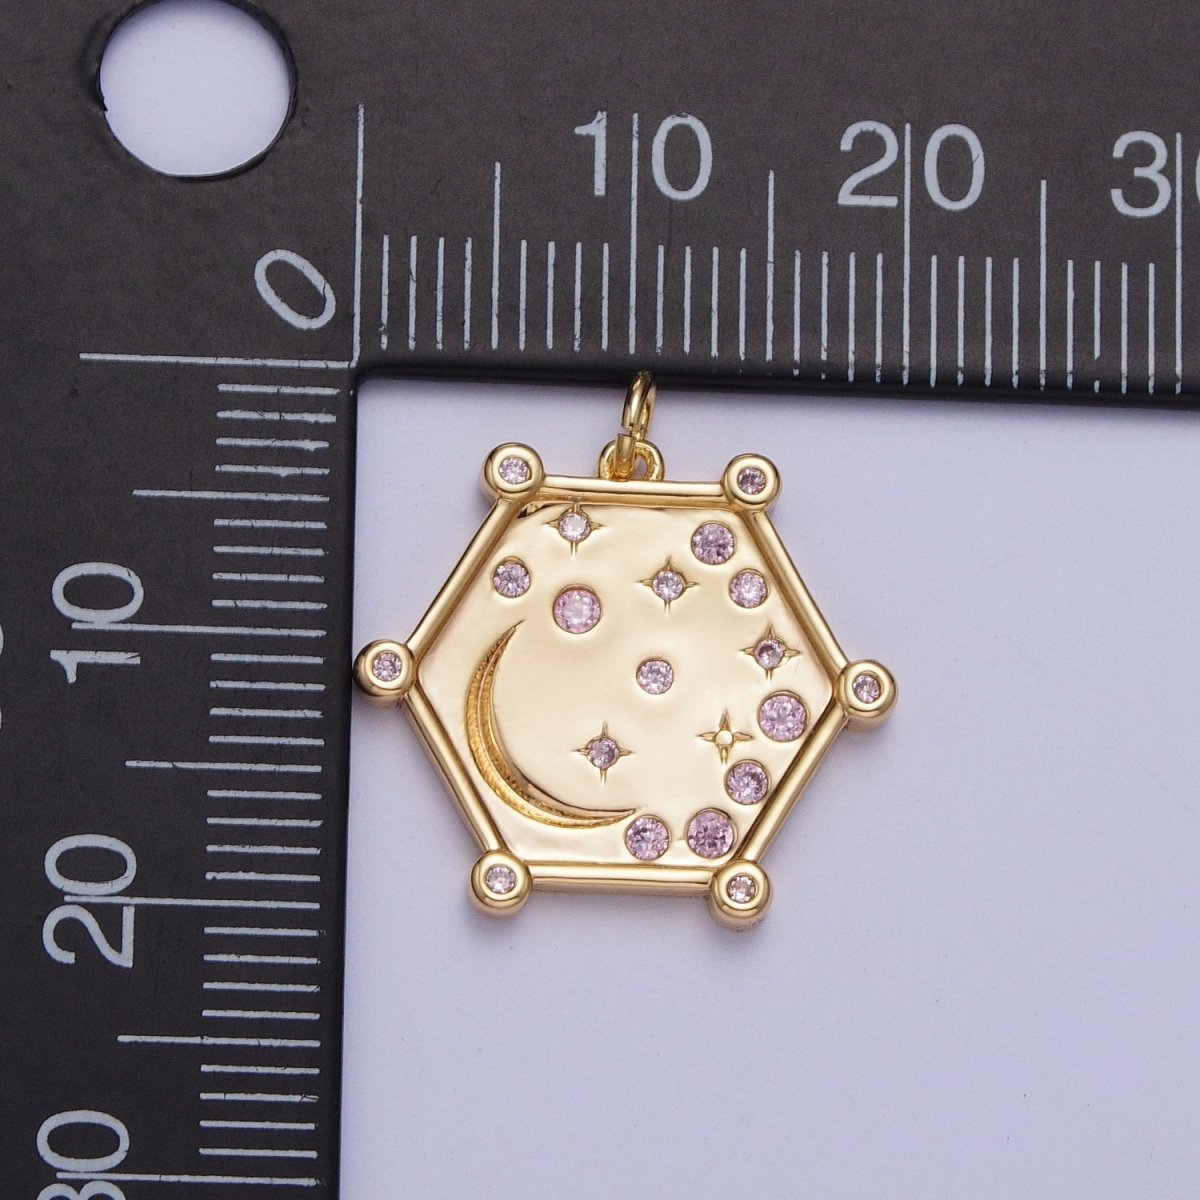 Gold Hexagonal Celestial Moon Cubic Zirconia Charm For Jewelry Making AG-054~AG-056 - DLUXCA